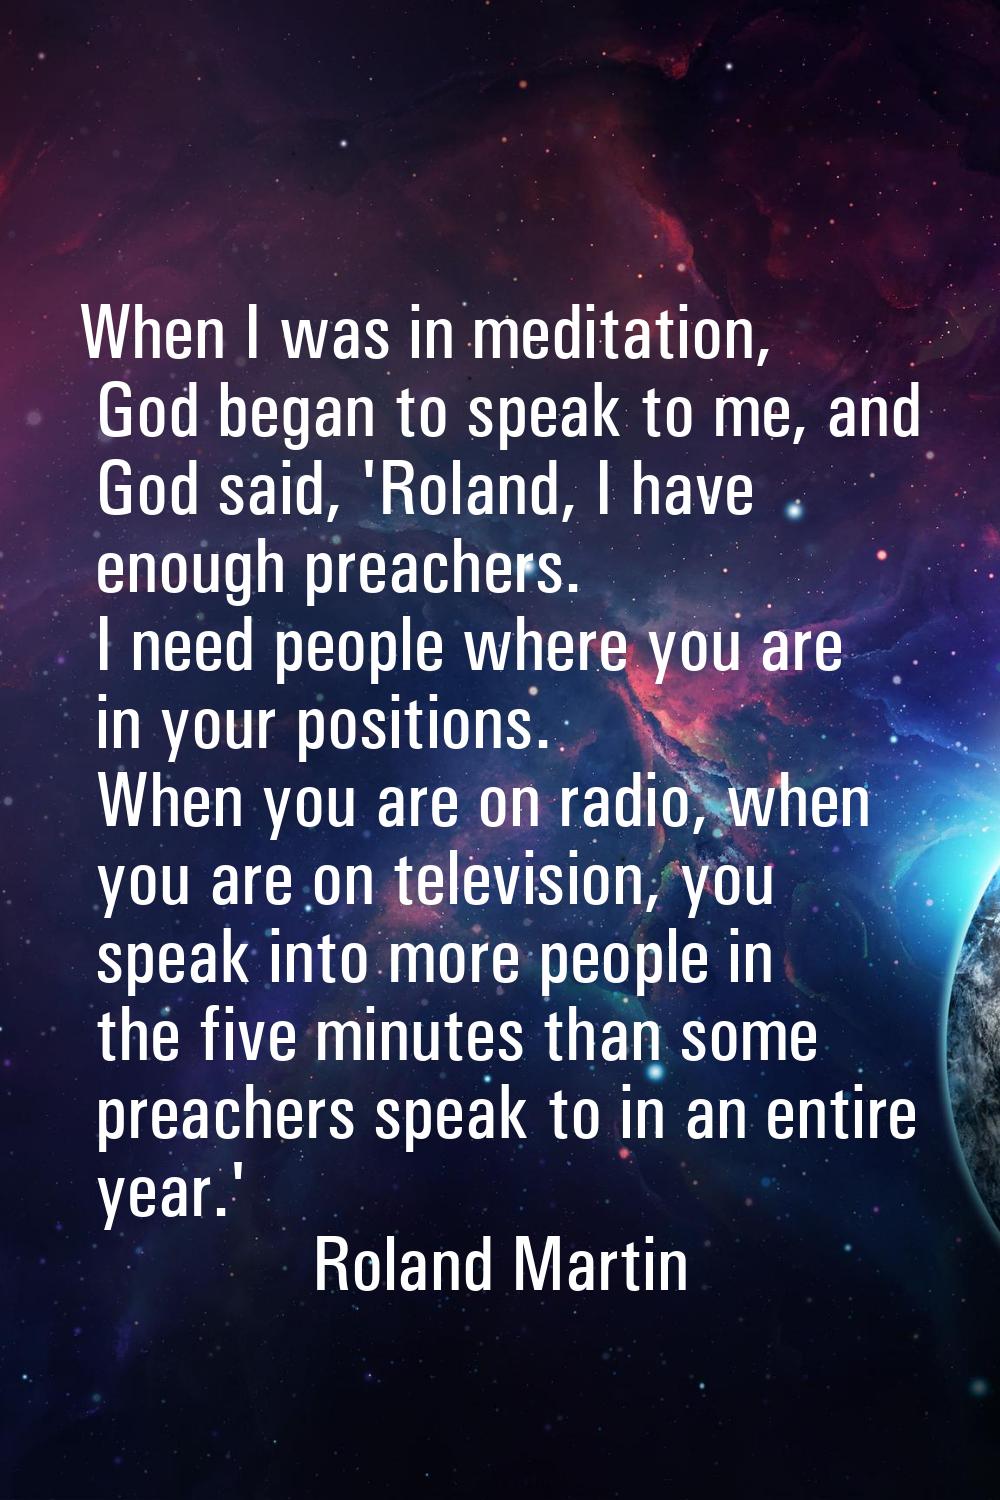 When I was in meditation, God began to speak to me, and God said, 'Roland, I have enough preachers.